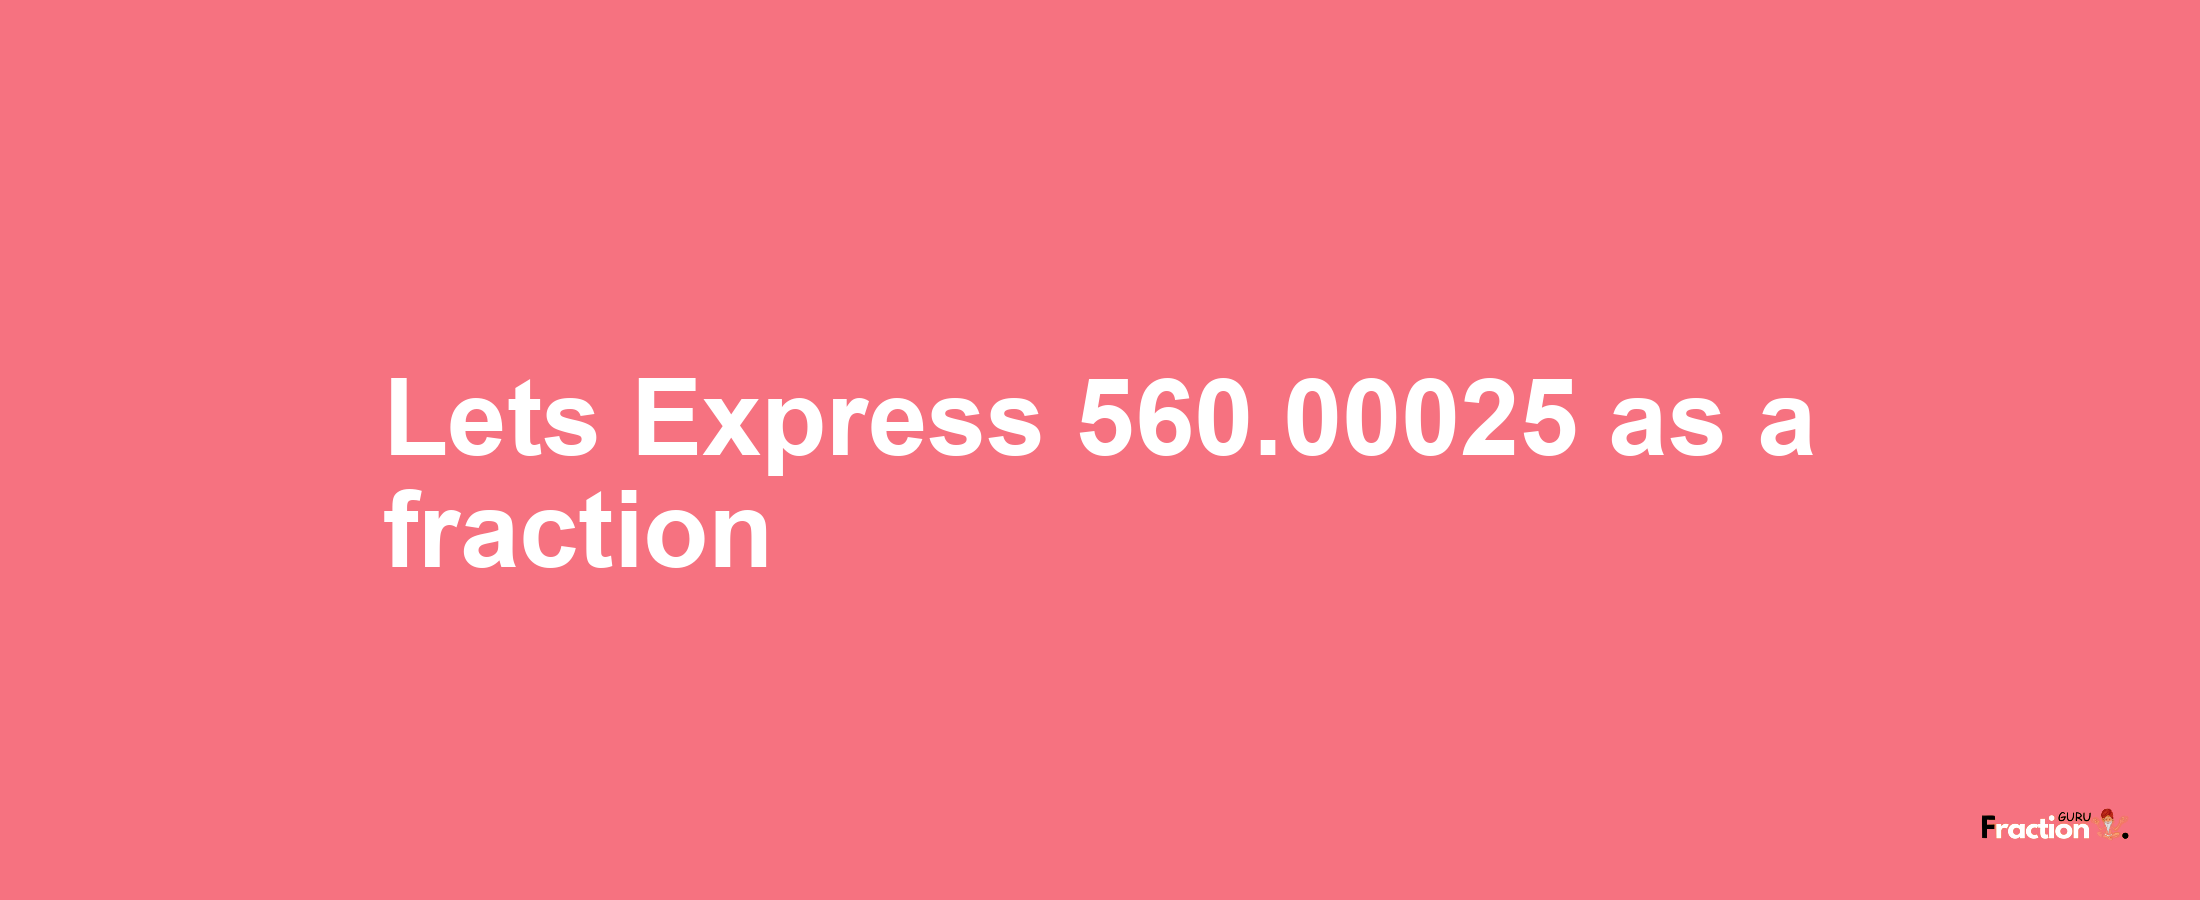 Lets Express 560.00025 as afraction